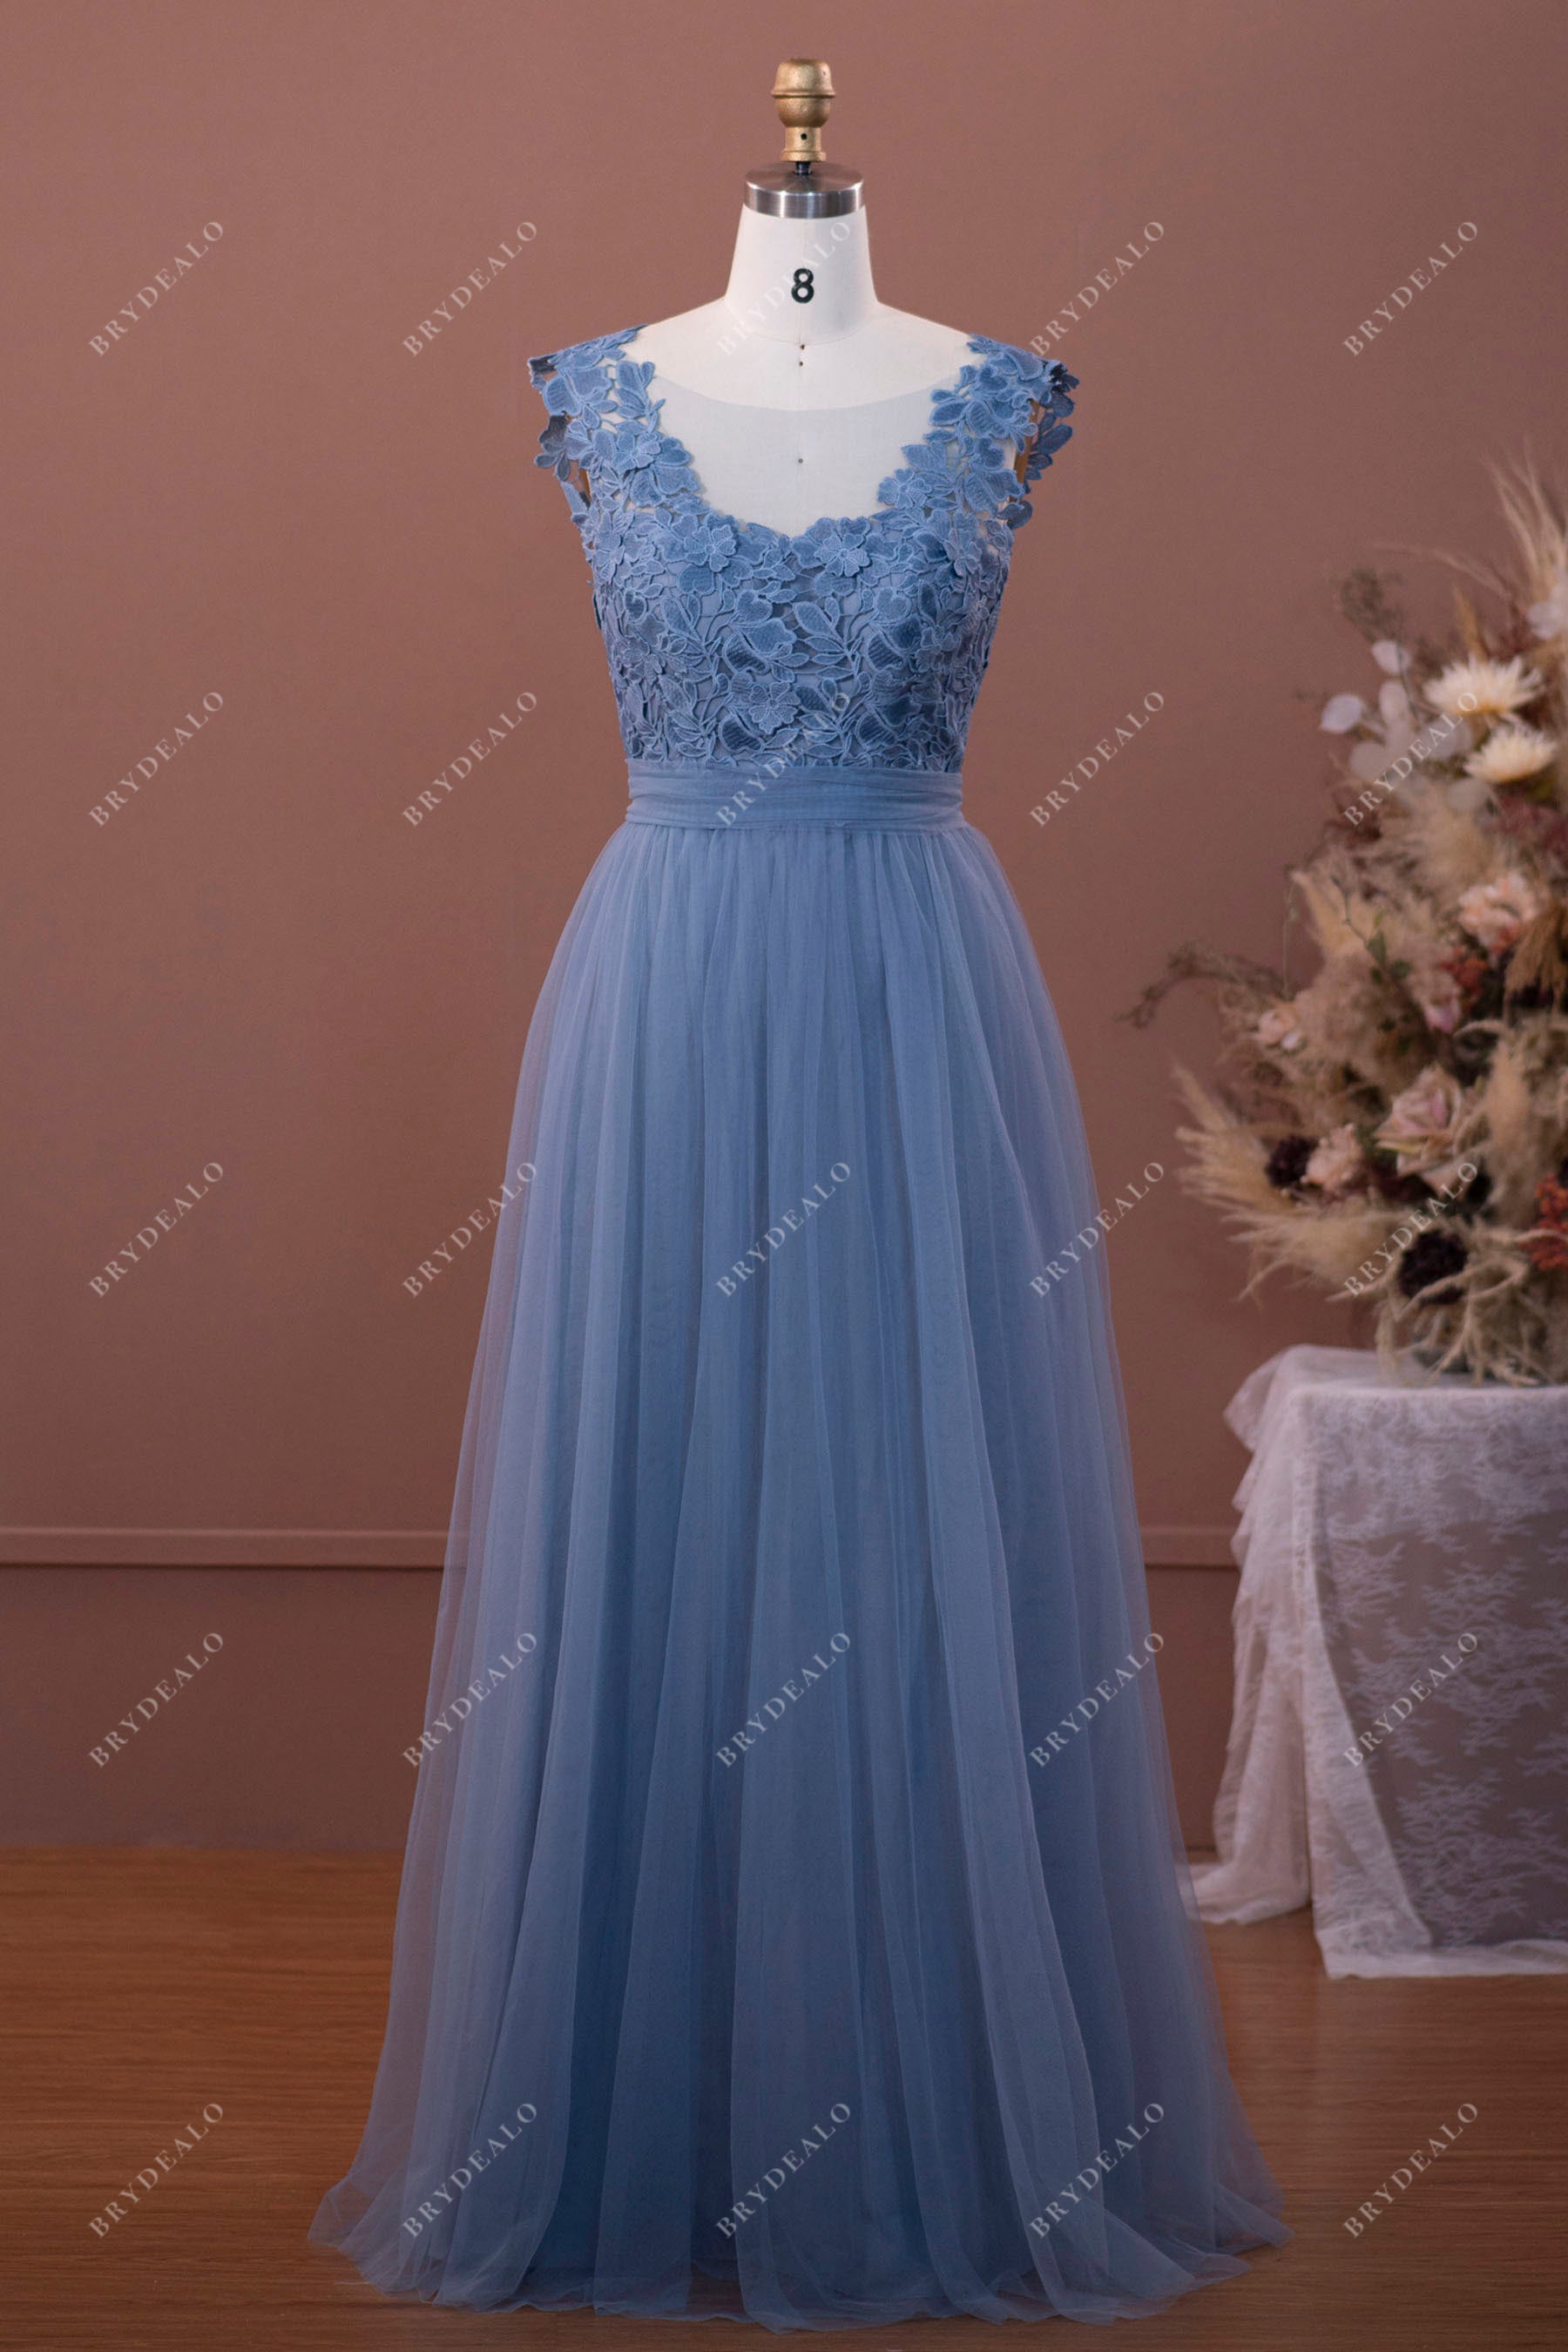 Dusty Blue Lace Tulle Illusion Neck A-line Bridesmaid Dress